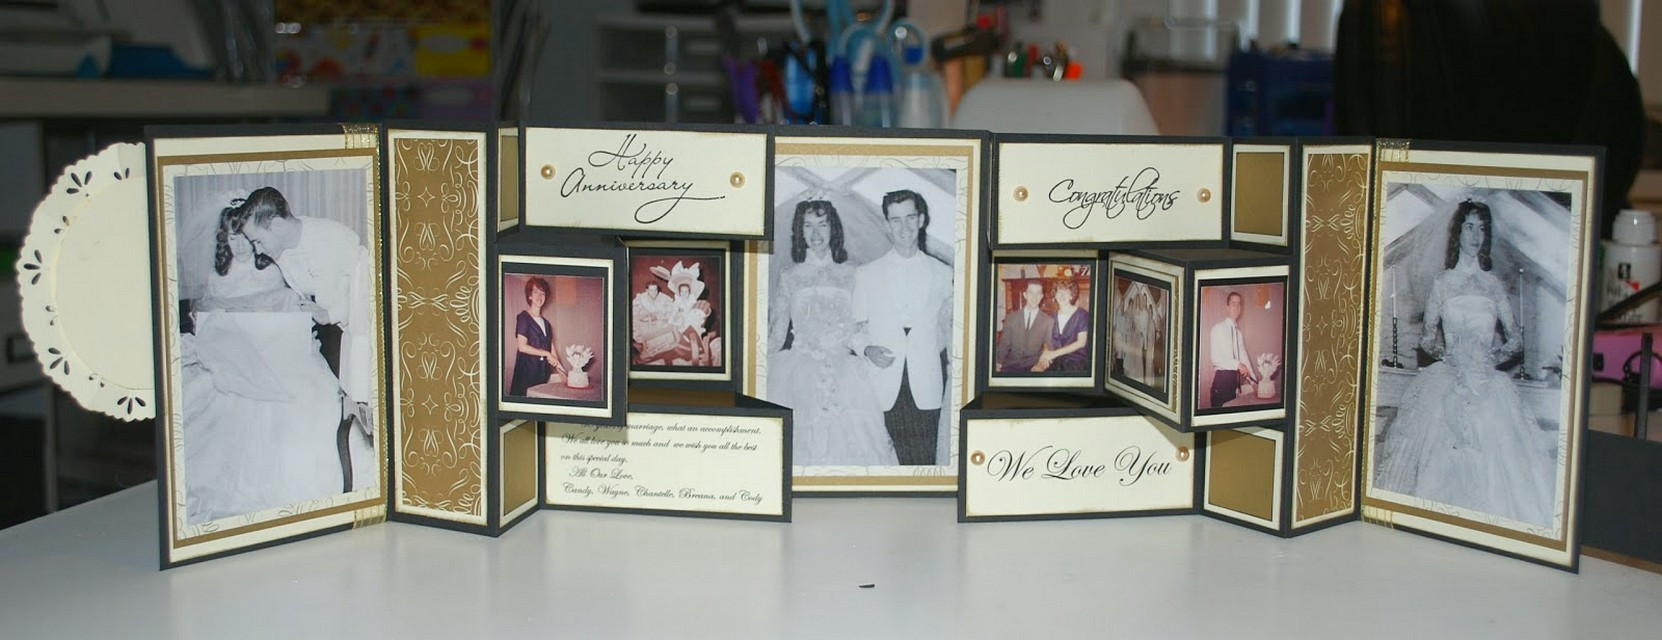 Gift Ideas For 50Th Wedding Anniversary For Parents
 What You Have to Think About 50th Wedding Anniversary